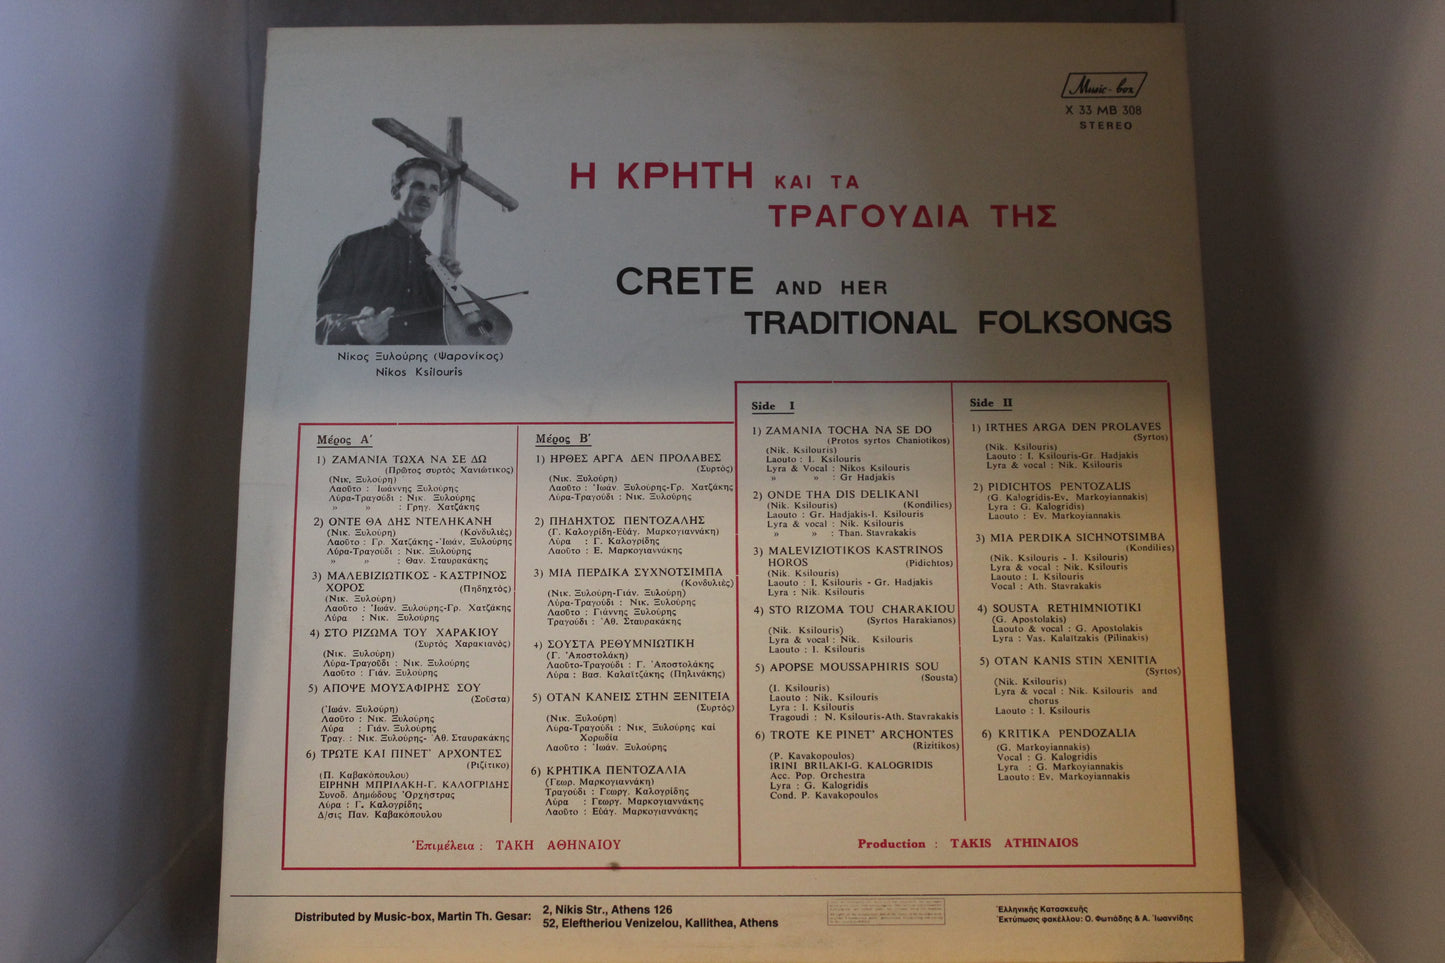 Grete and her traditional Folk songs lp-levy